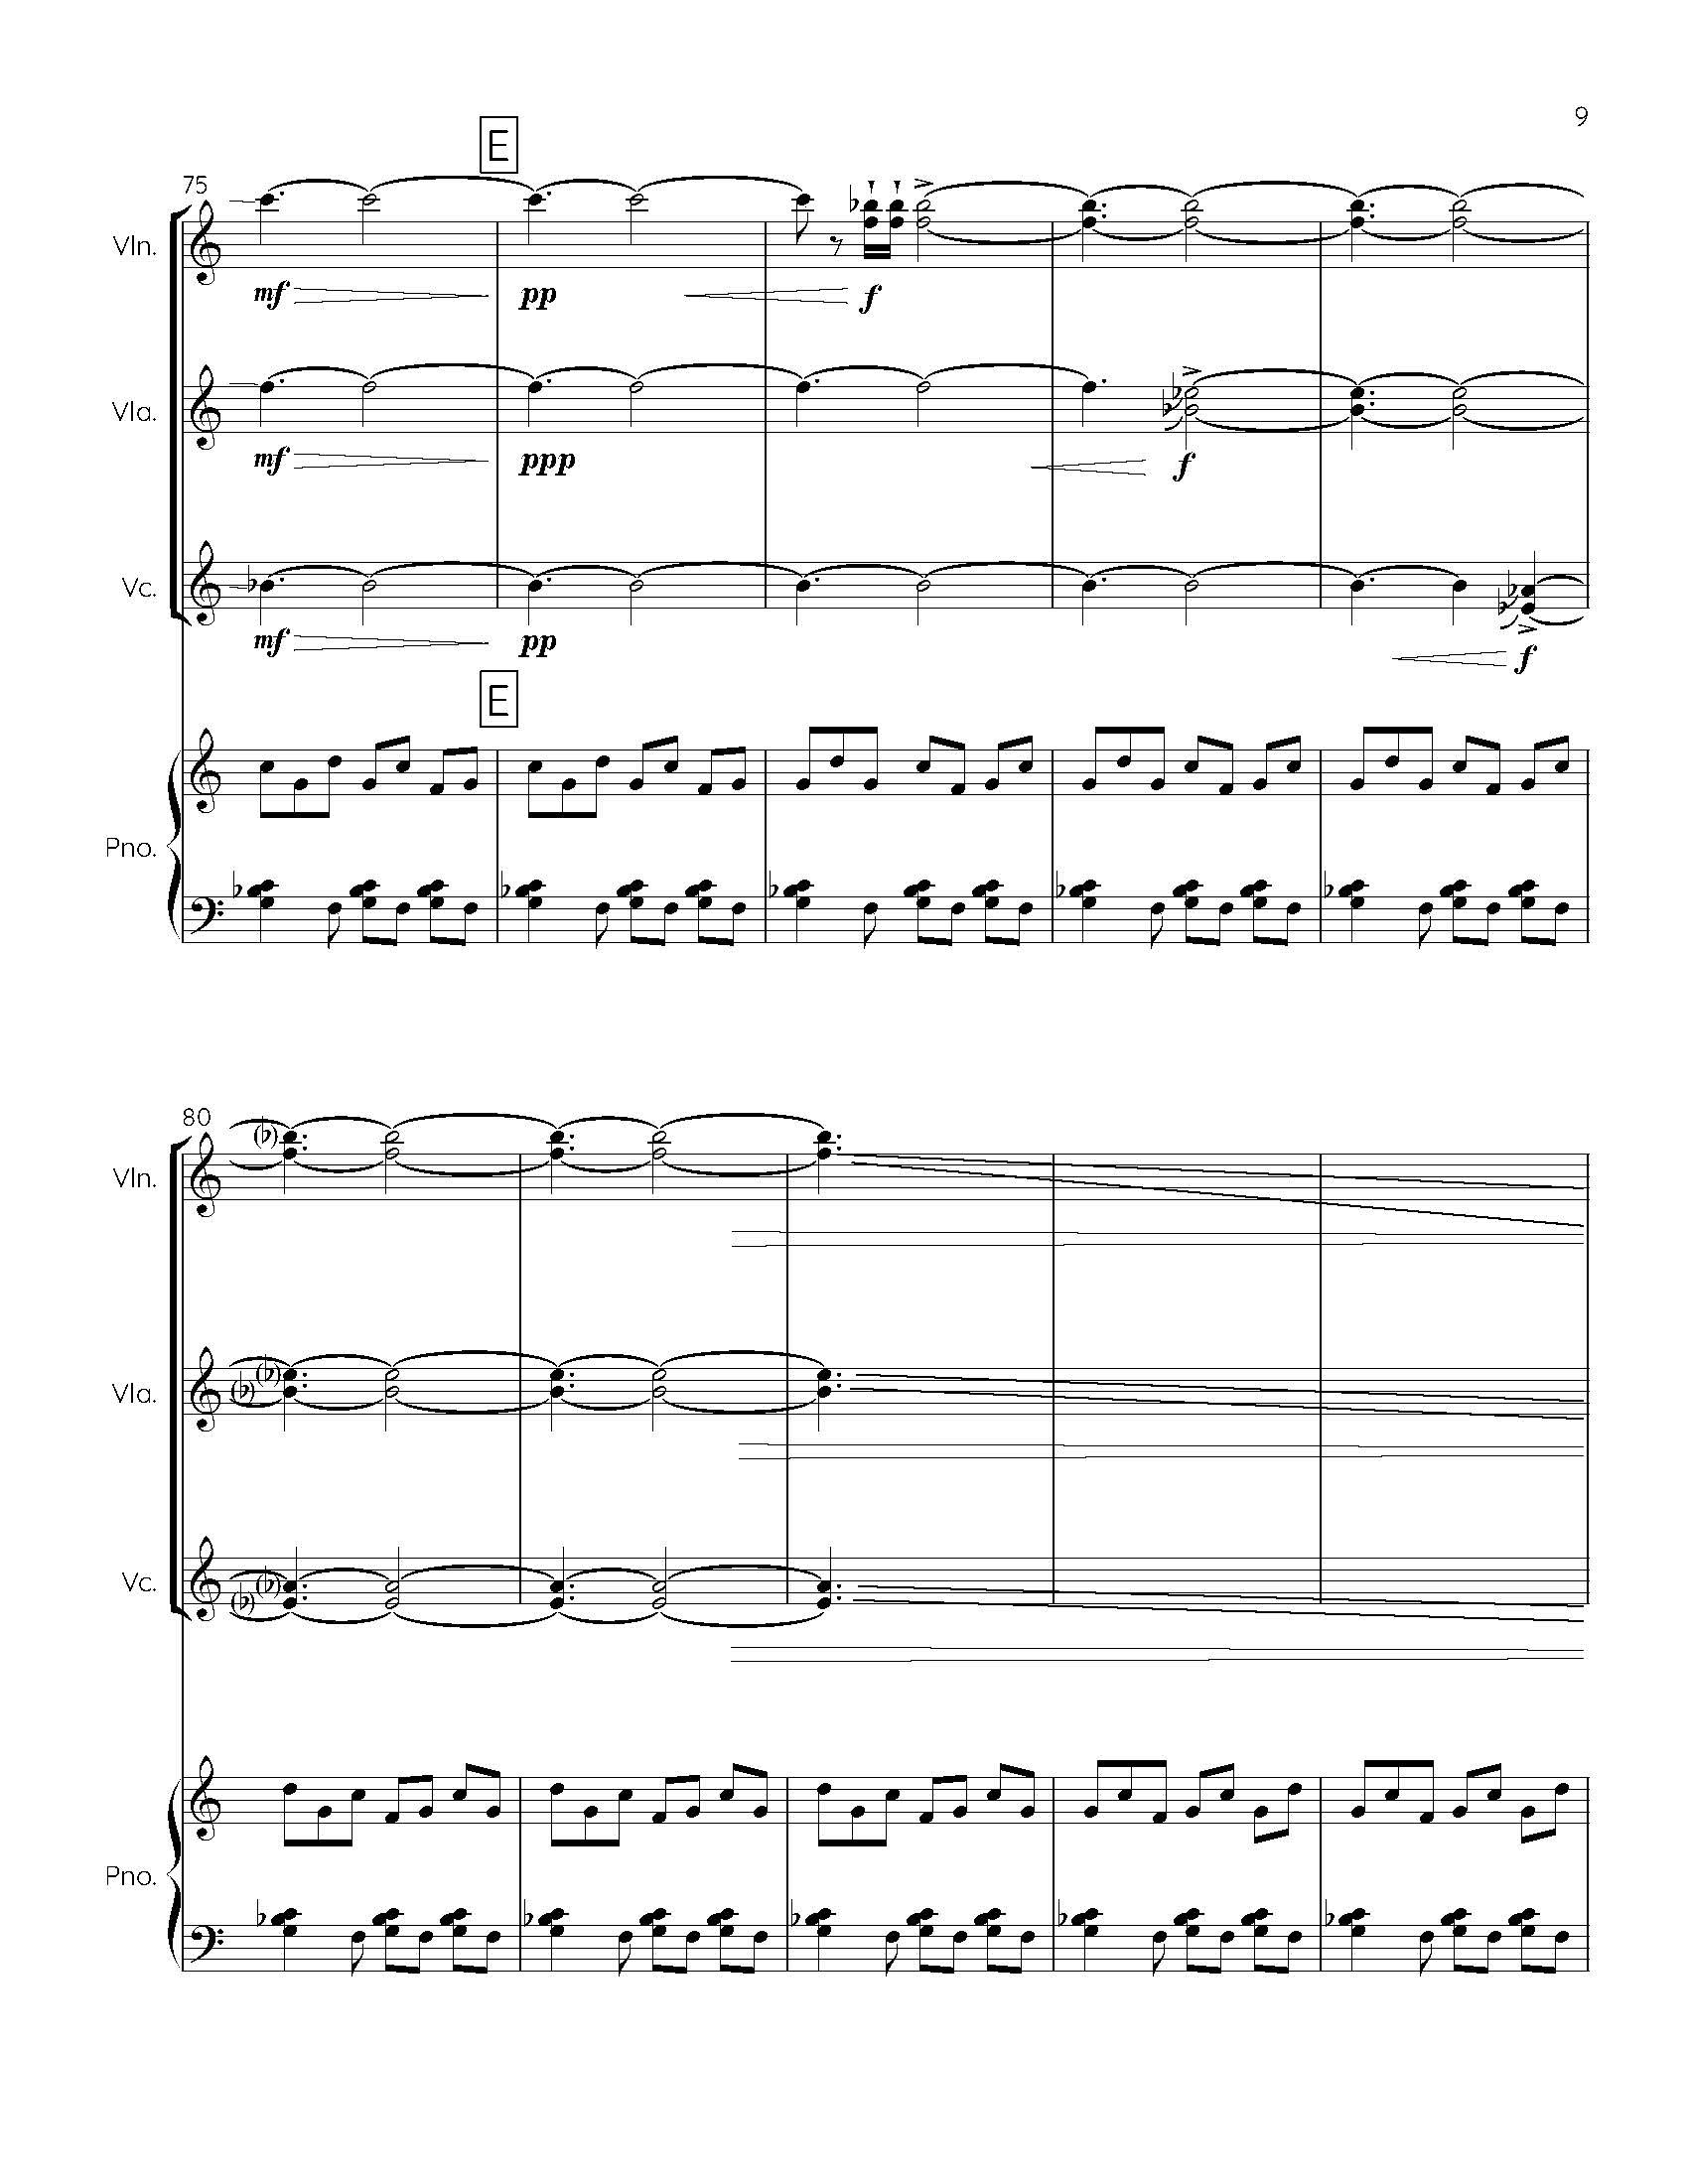 I S L A N D I - Complete Score_Page_15.jpg